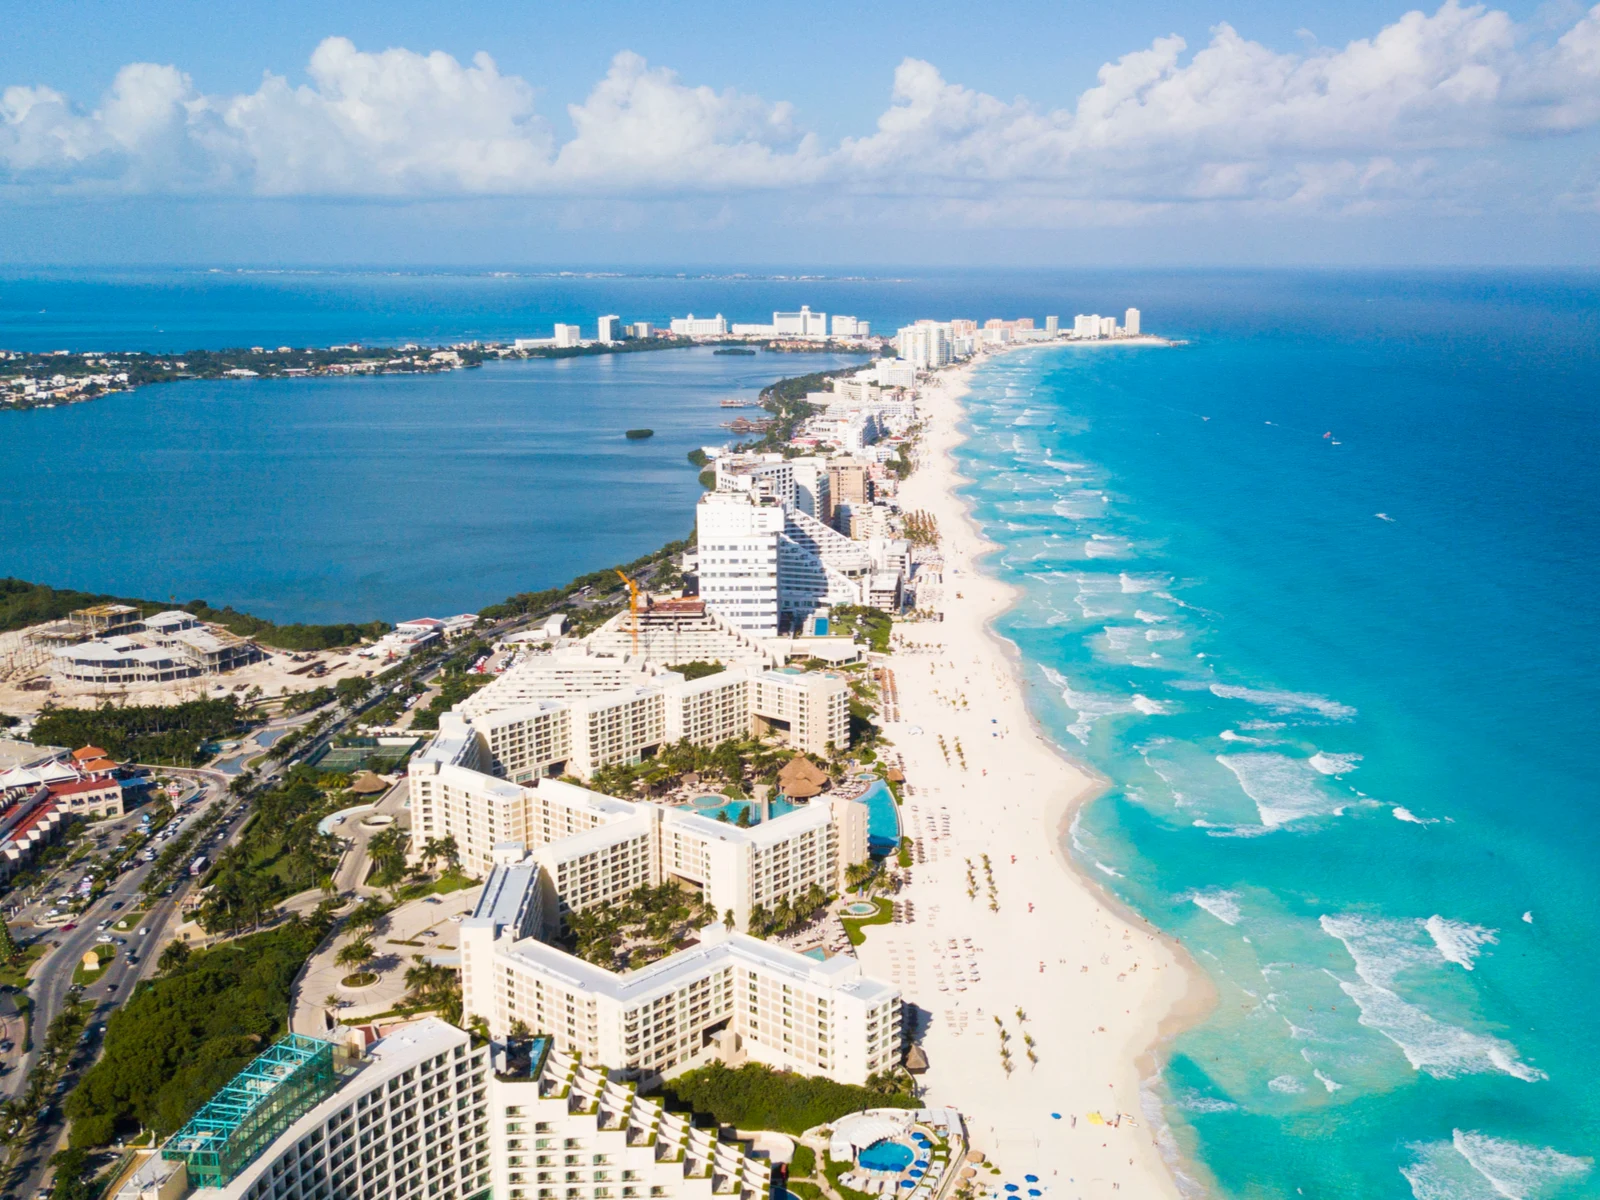 Aerial view on series of luxuries hotels, the best all-inclusive resorts in Cancun for families, lined up at a turquoise beach 